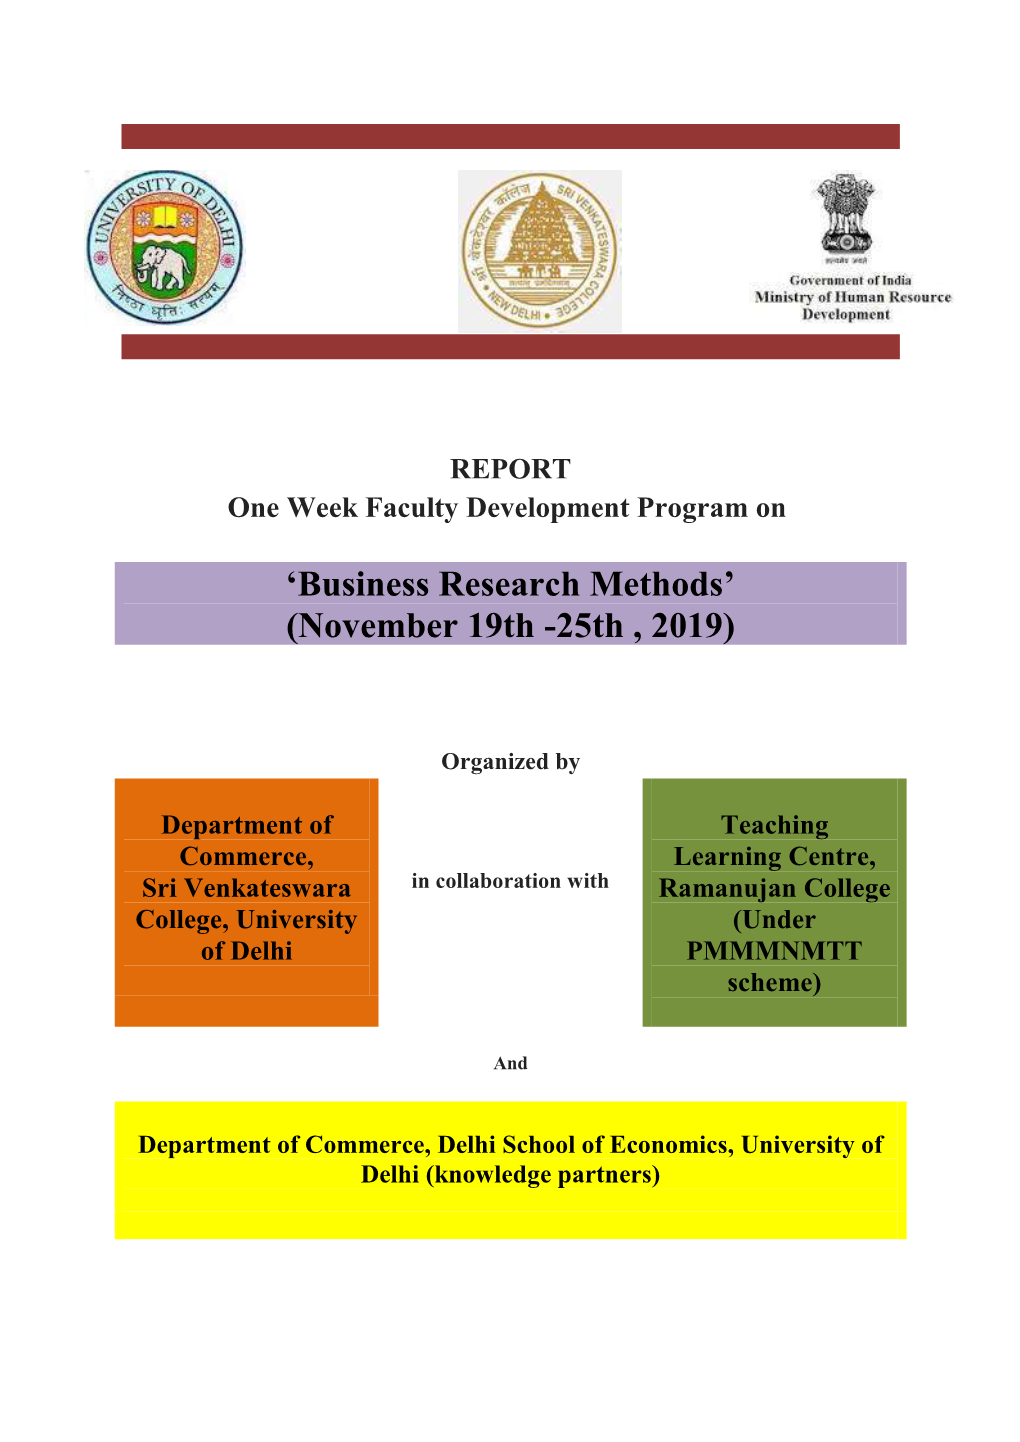 'Business Research Methods' (November